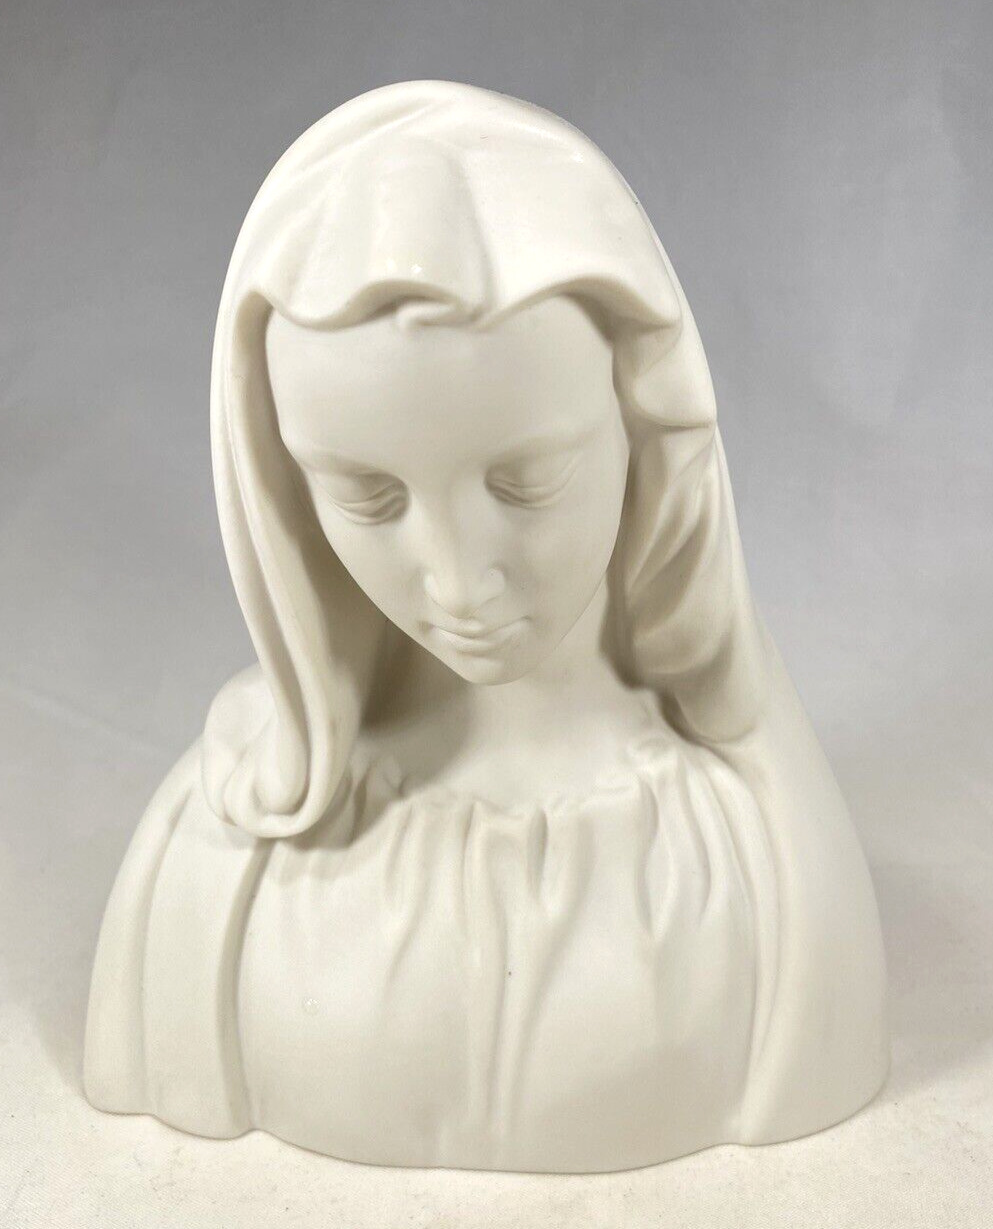 Vintage BOEHM White Porcelain Bisque Holy Virgin Mary Mother Bust Figure 6.5”